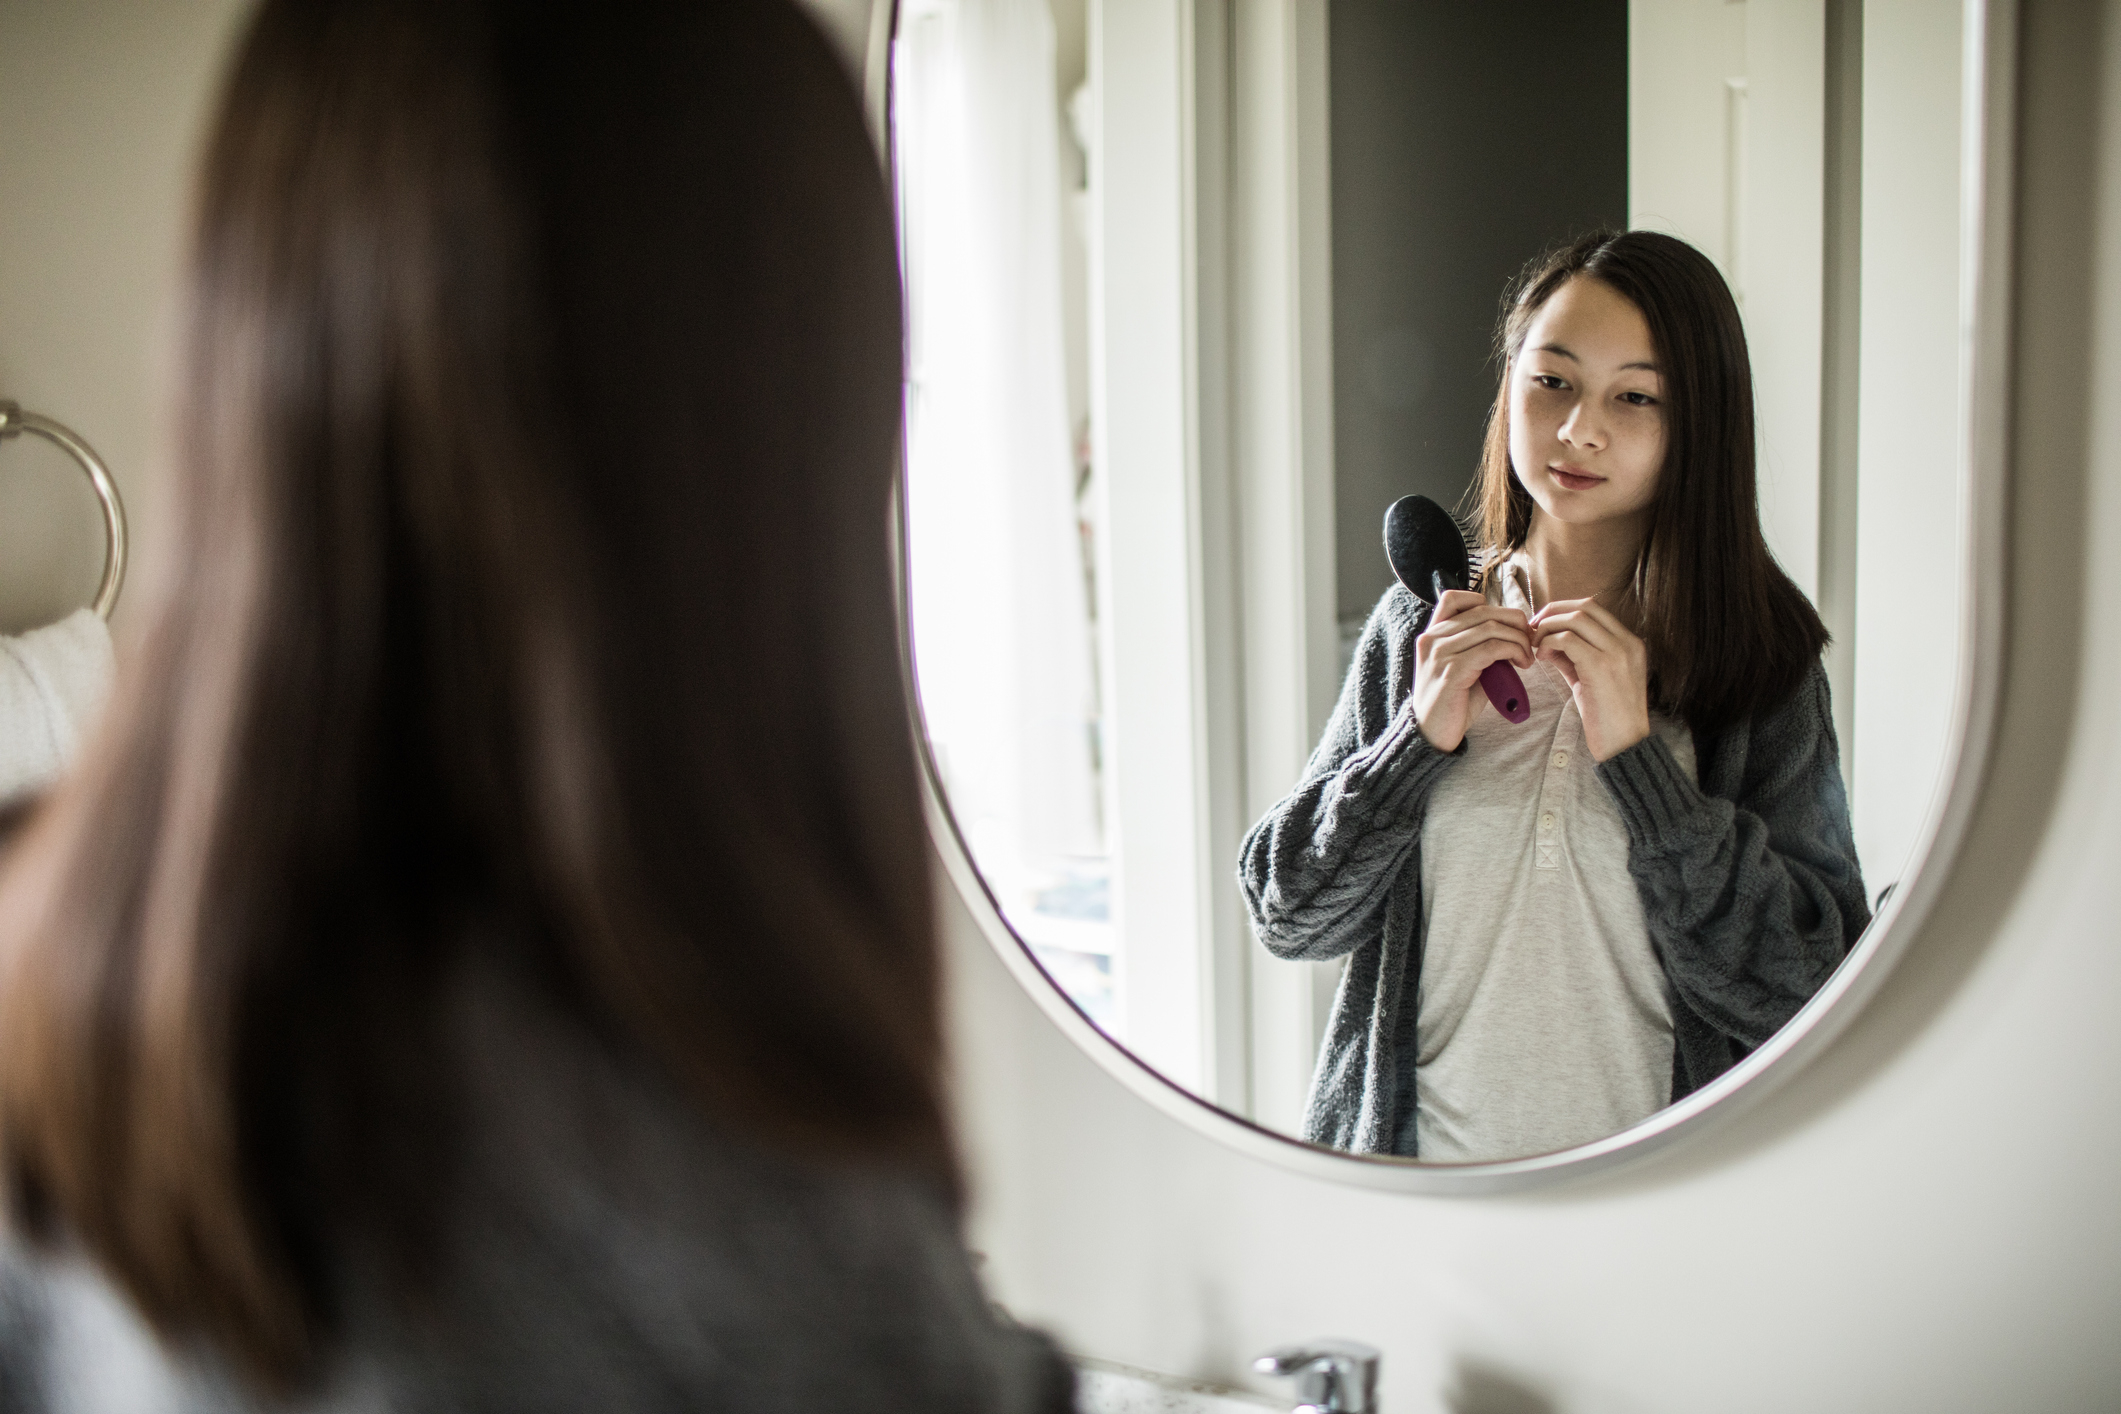 A teenage girl is looking at herself in a mirror